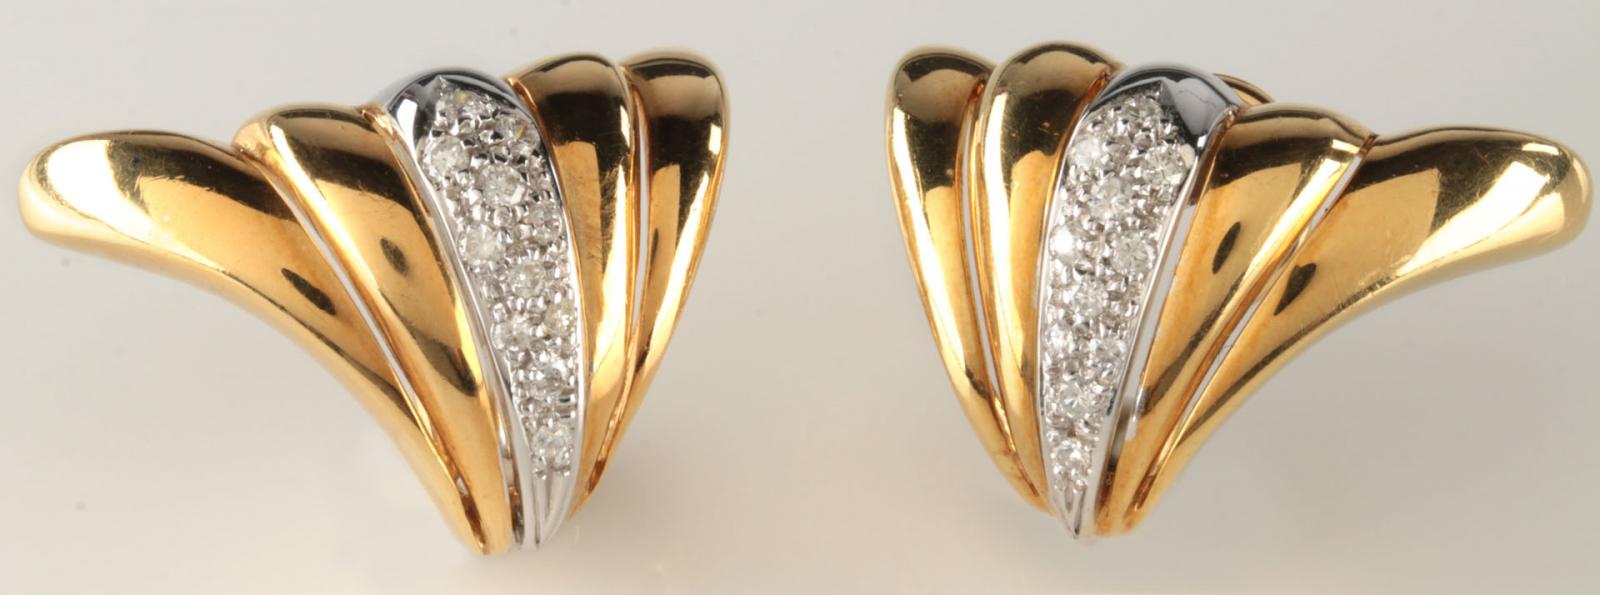 A PAIR OF 18K GOLD AND DIAMOND EARRINGS